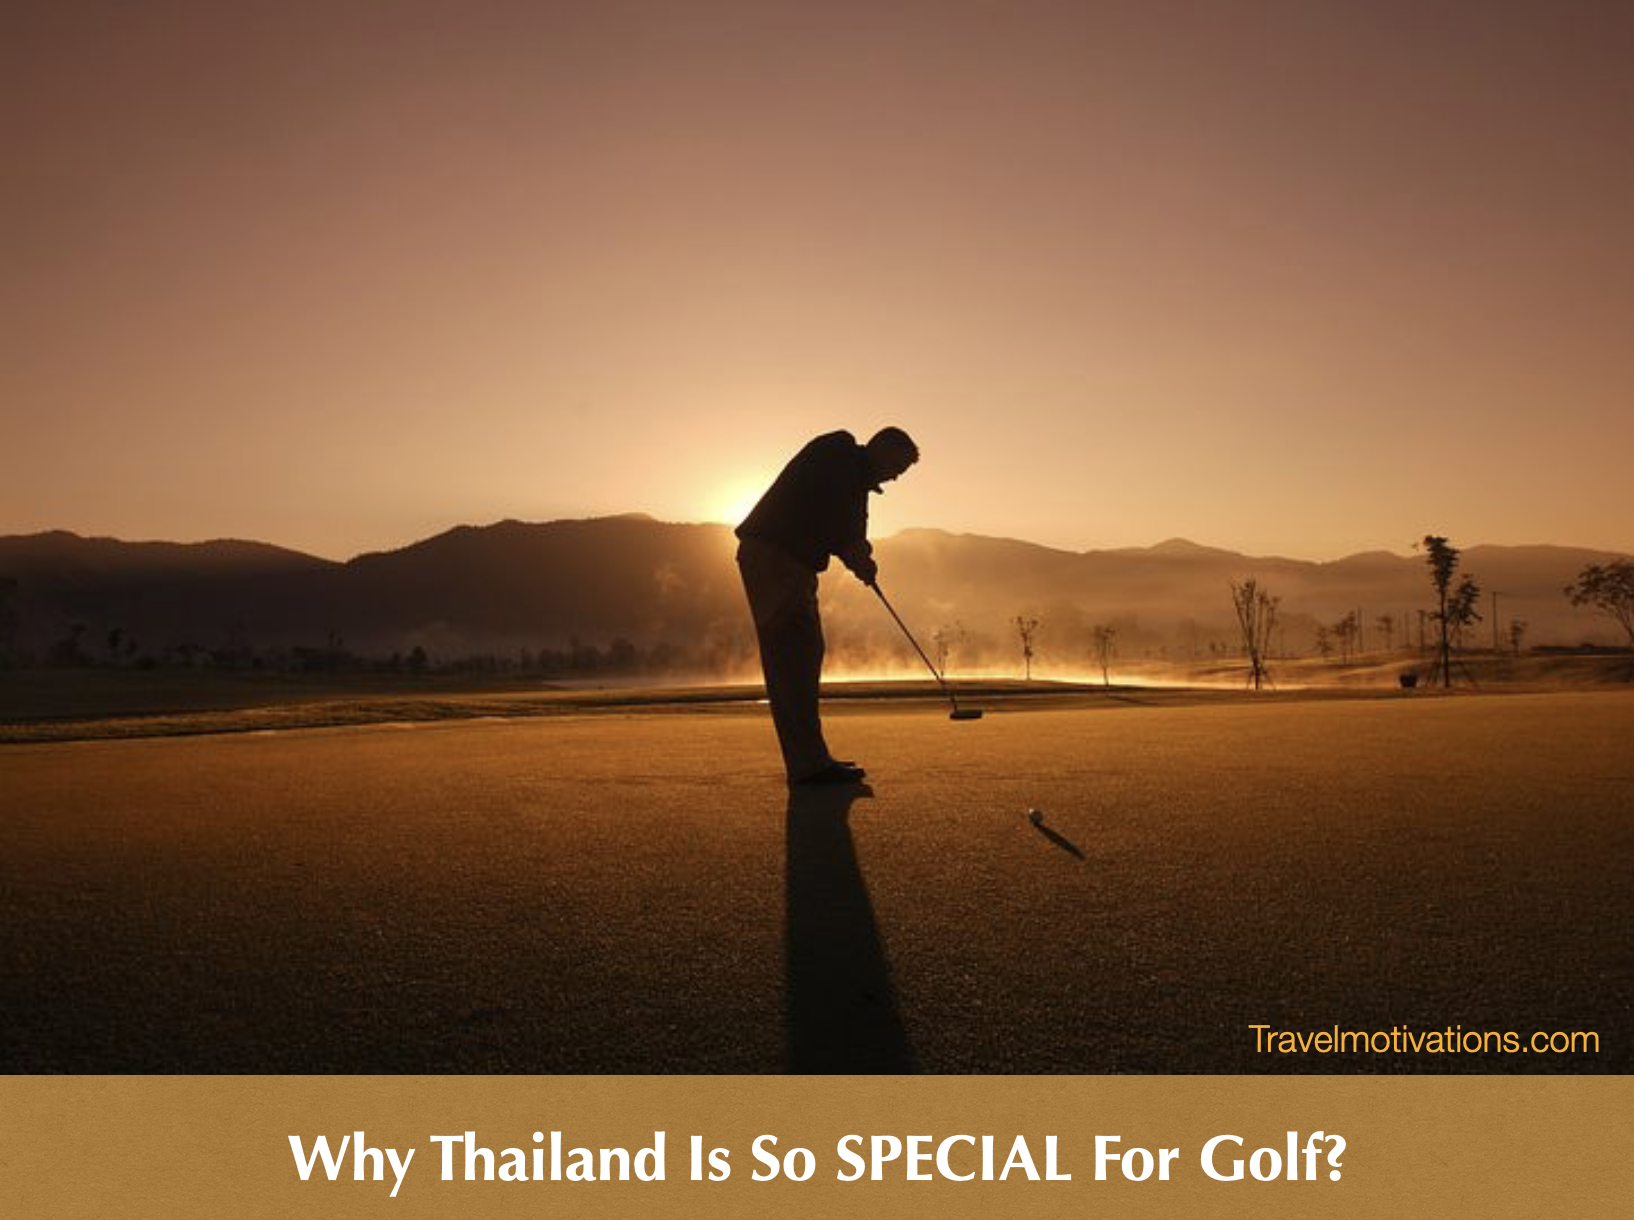 Why Thailand is so Special for a Golfing Experience